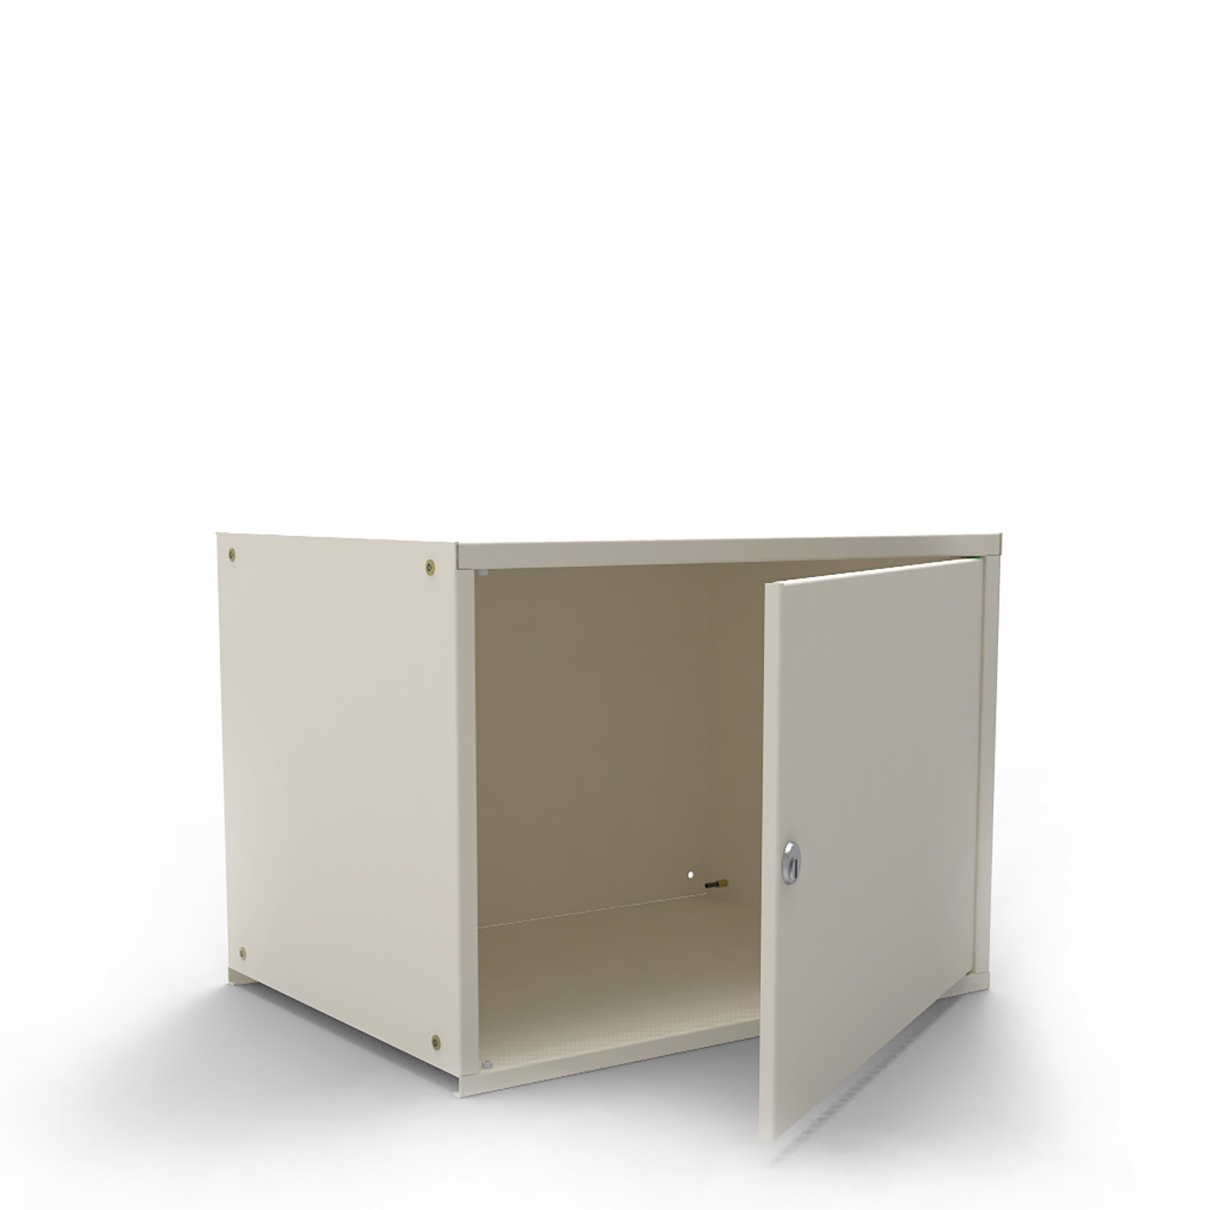 Lockable compartment 355 mm S2 cabinet in the group All products / Interior fittings / Lockable compartments at MBG Sweden (719159)